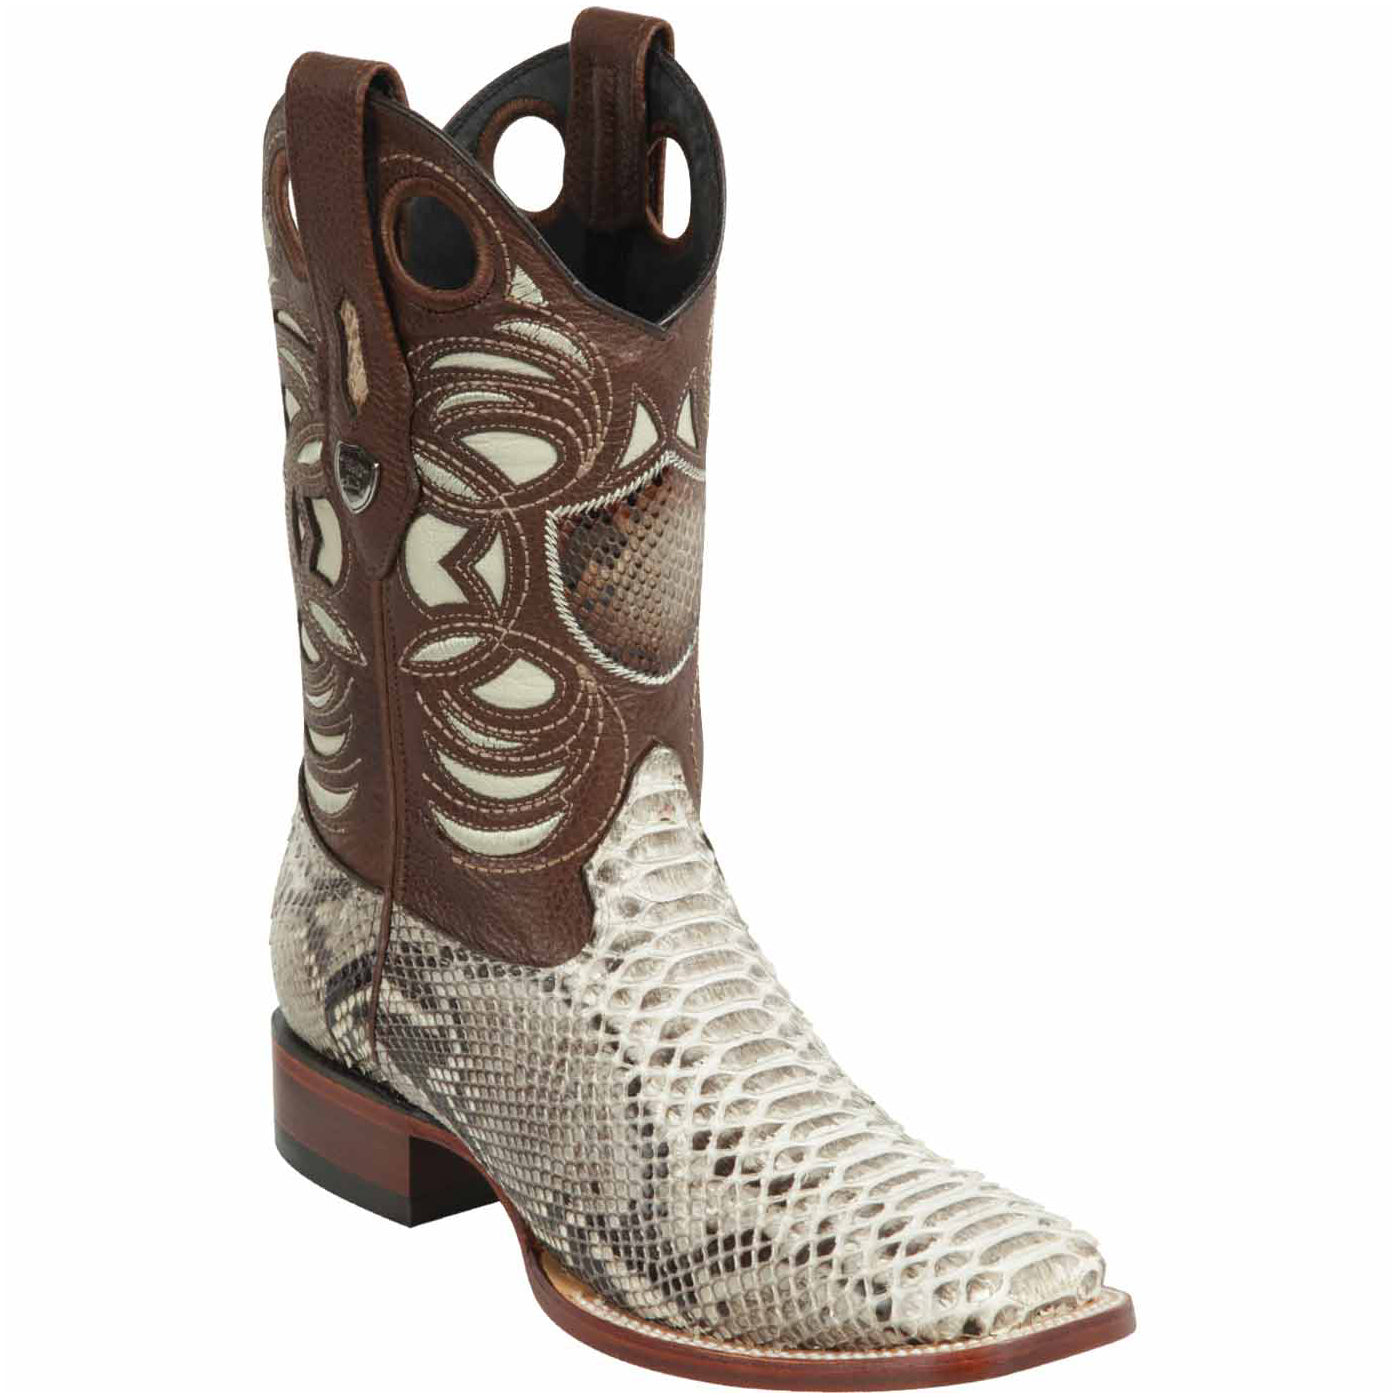 Mens Python Skin Boots Square Toe - Wild West Boots